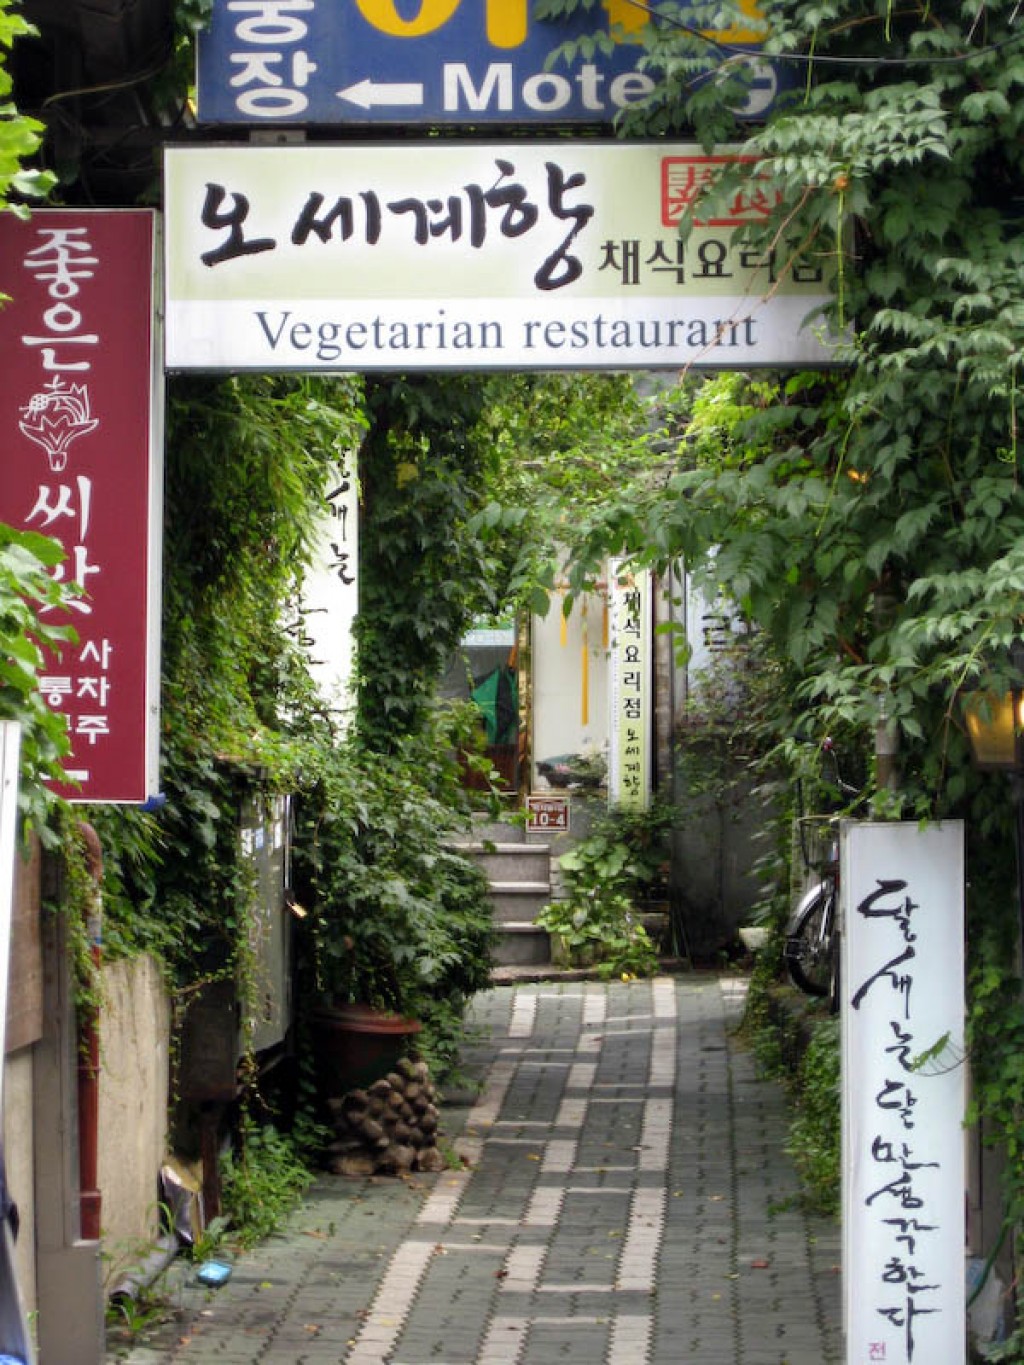 We found this very good vegetarian restaurnt off a side street from Insadong-il.  We have no idea what the English name is.